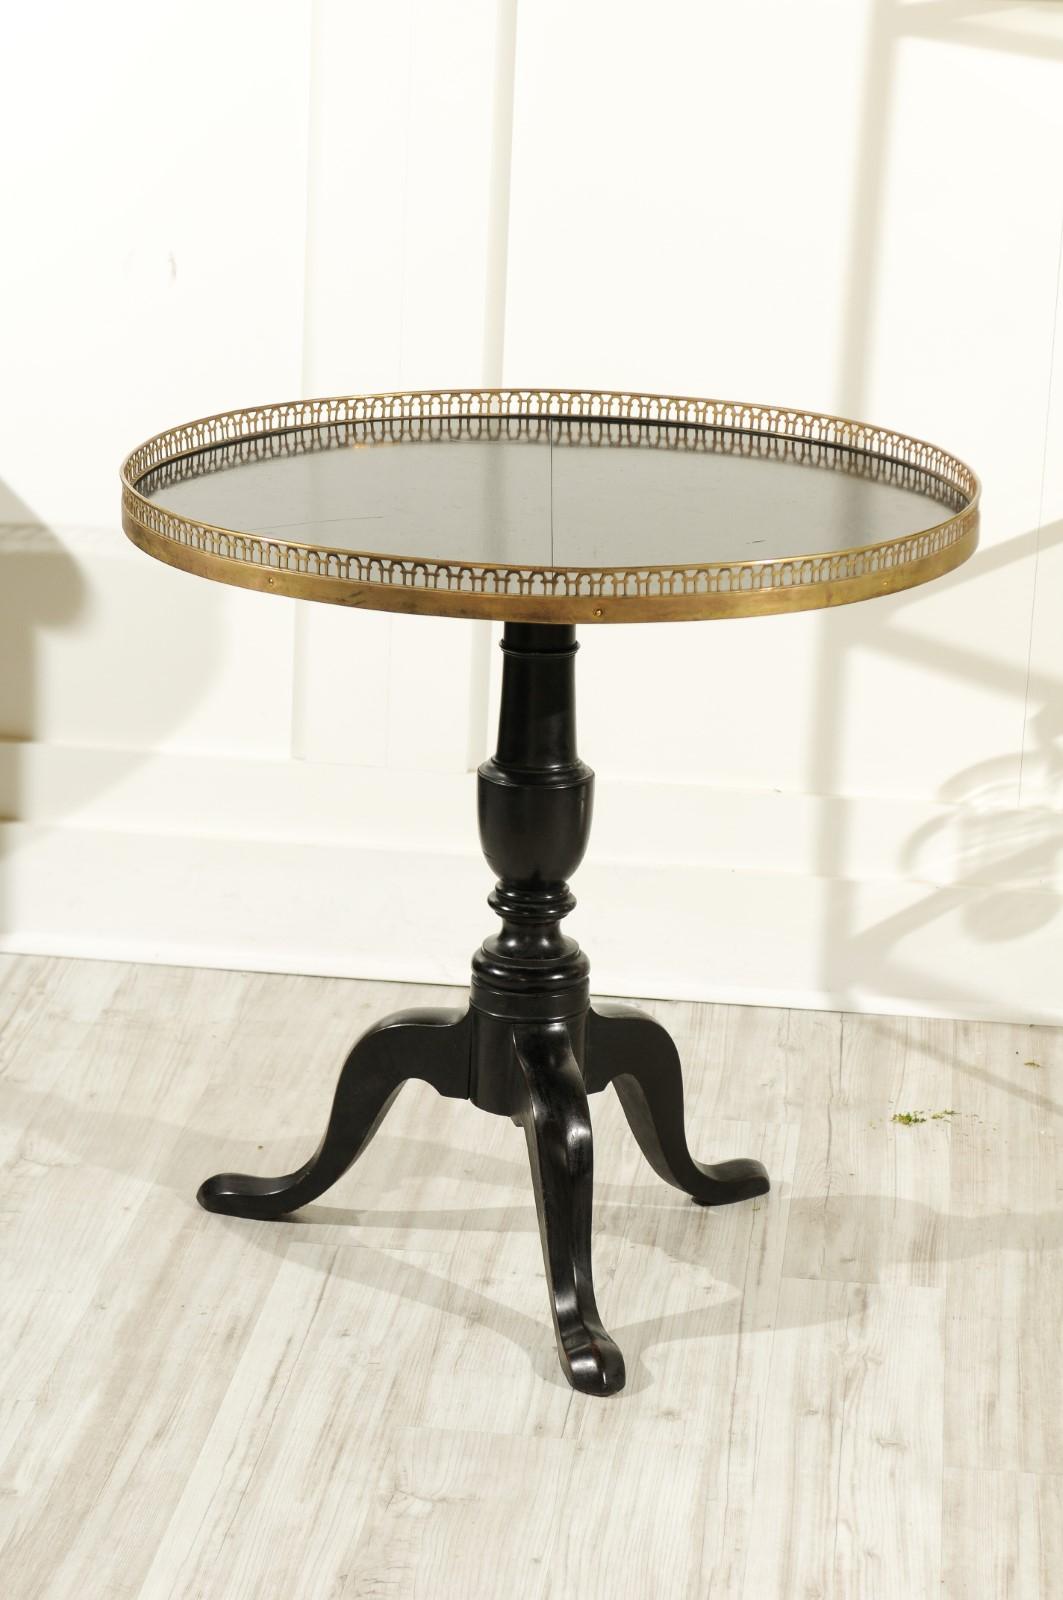 A French black-painted wooden tilt-top table from the early 20th century, with circular pierced brass gallery, turned pedestal and tripod base. This charming French black-painted tilt-top table is a strong counterpoint next to a sofa, in between